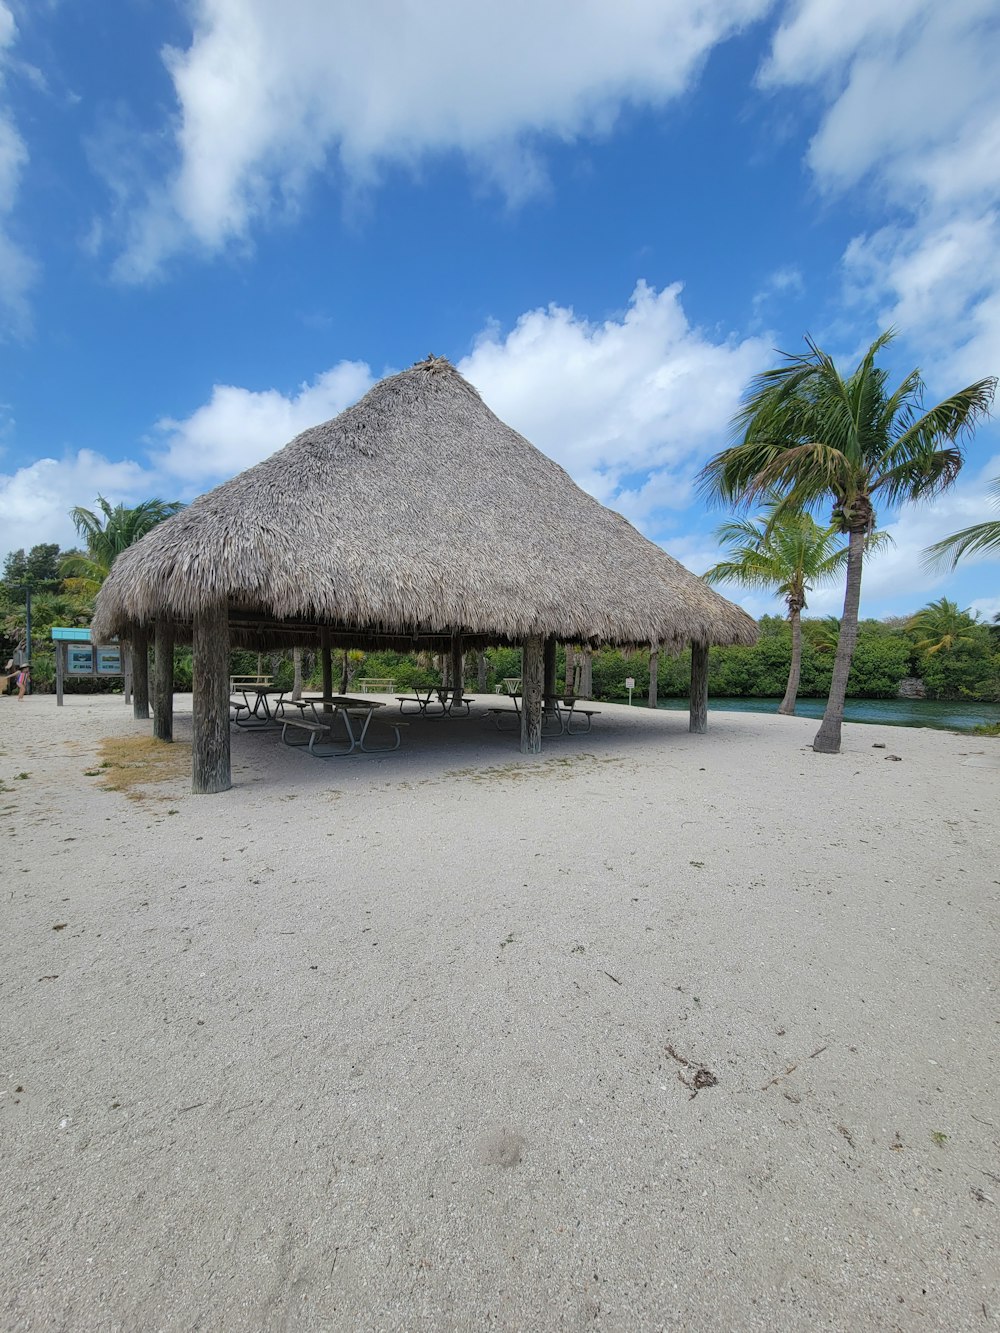 a hut with a thatched roof on a beach